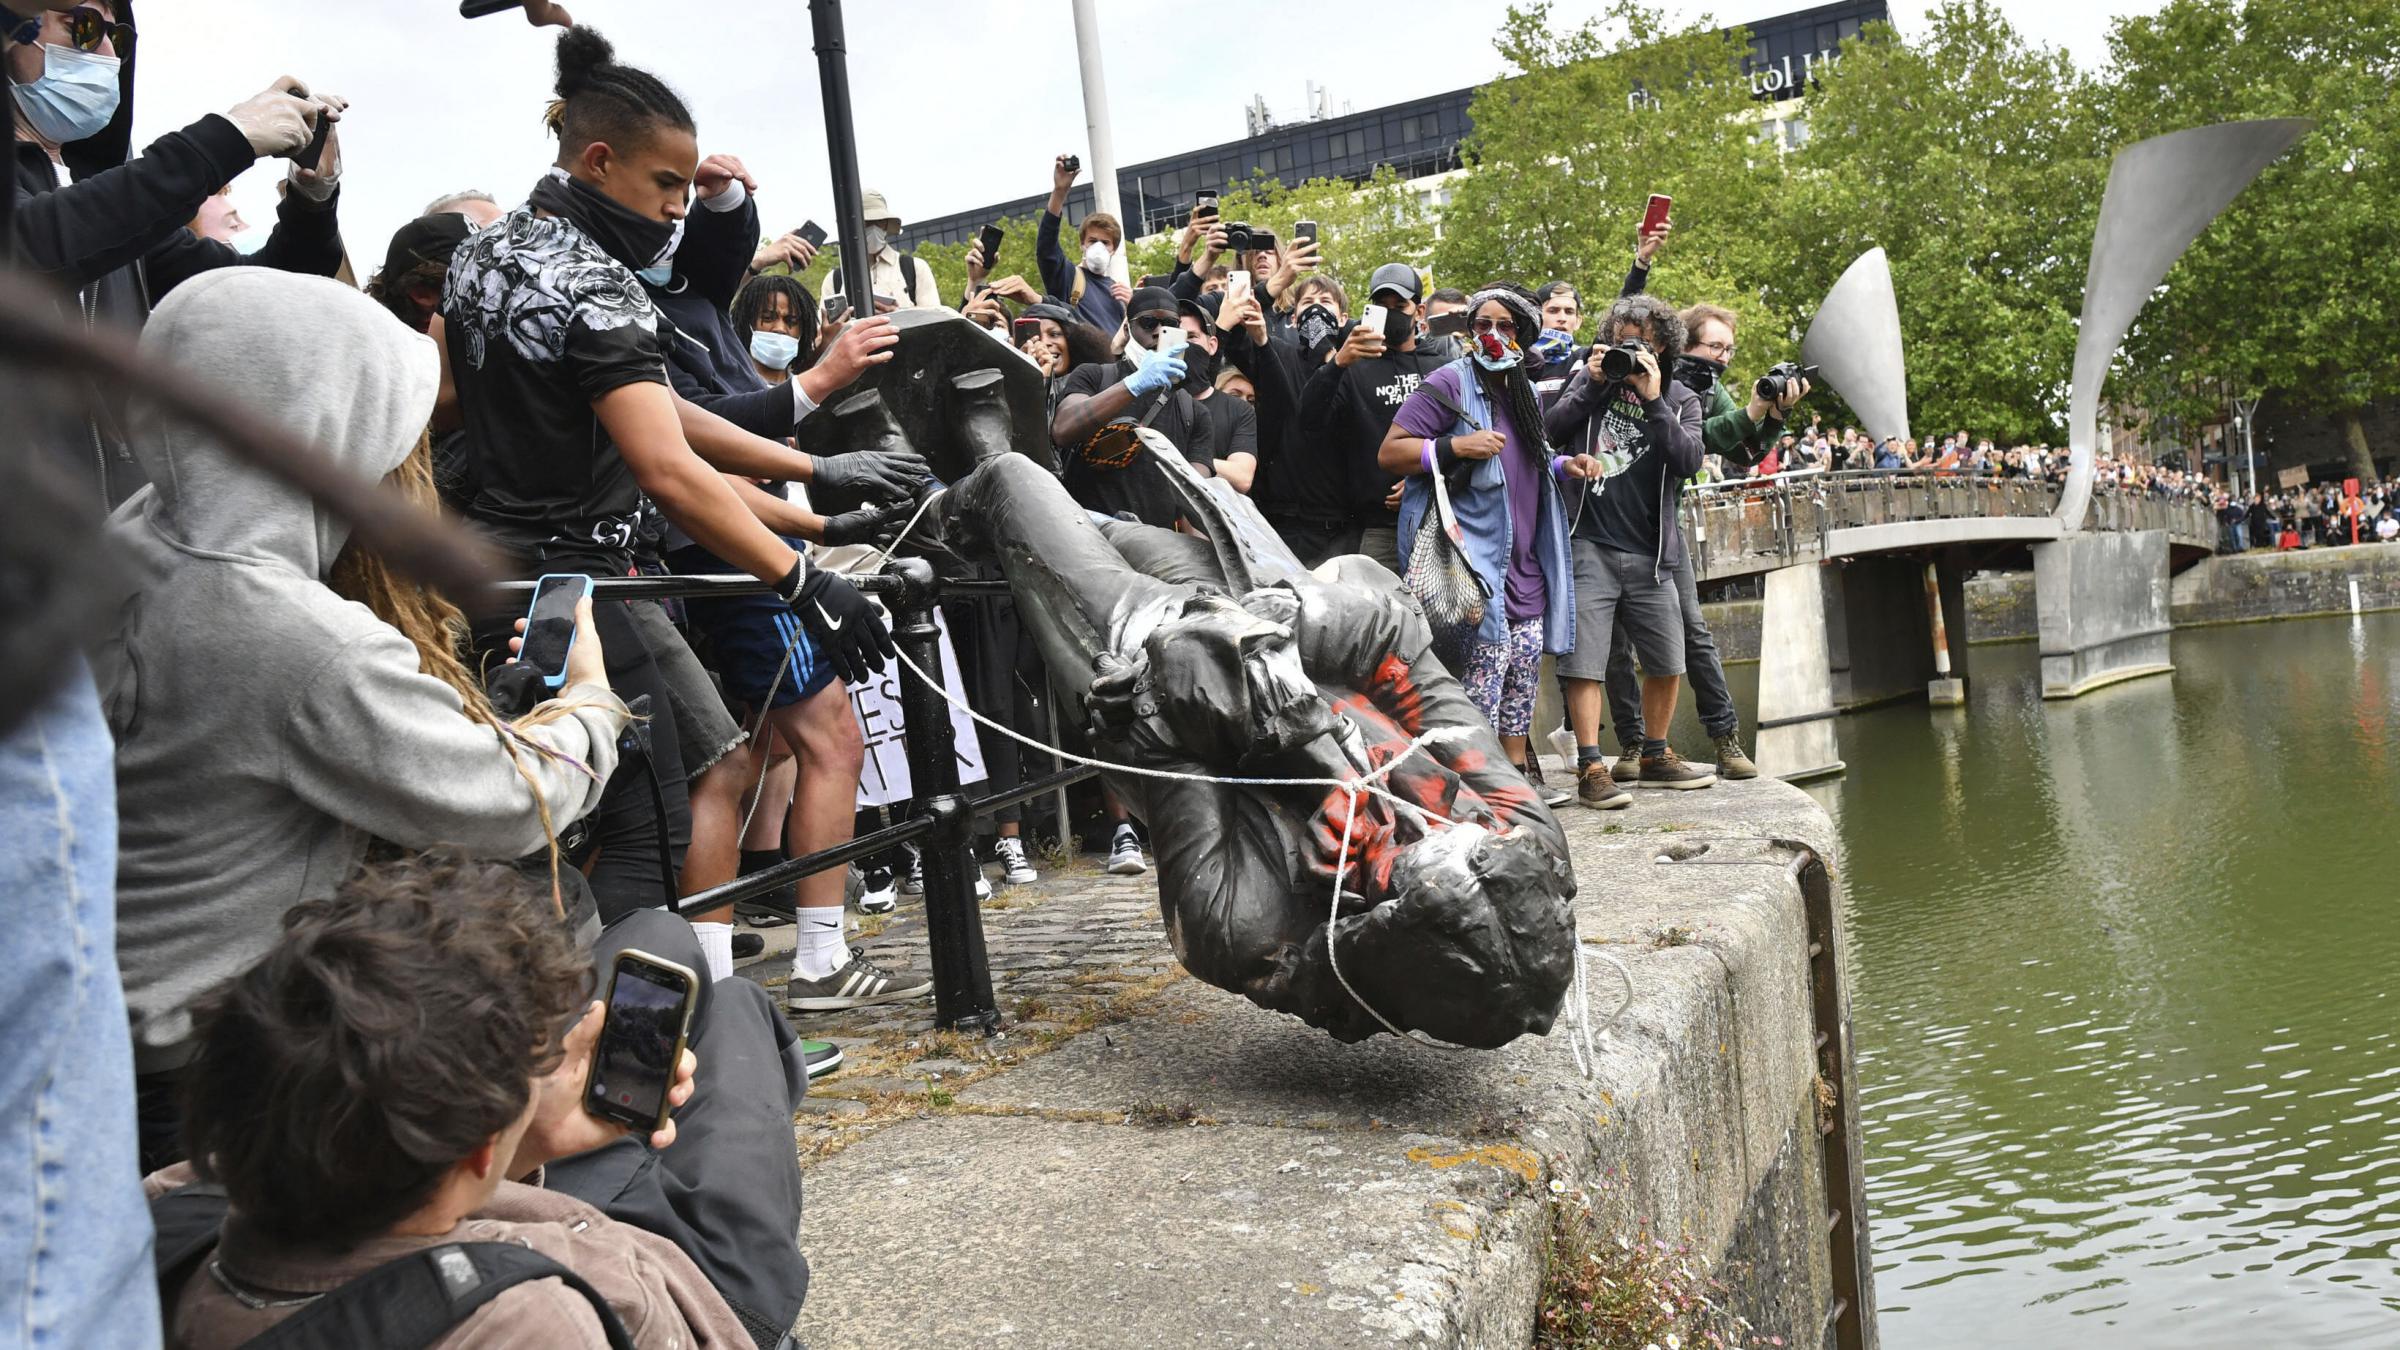 Protesters Topple British Slave Trader Statue During Anti-Racism ...